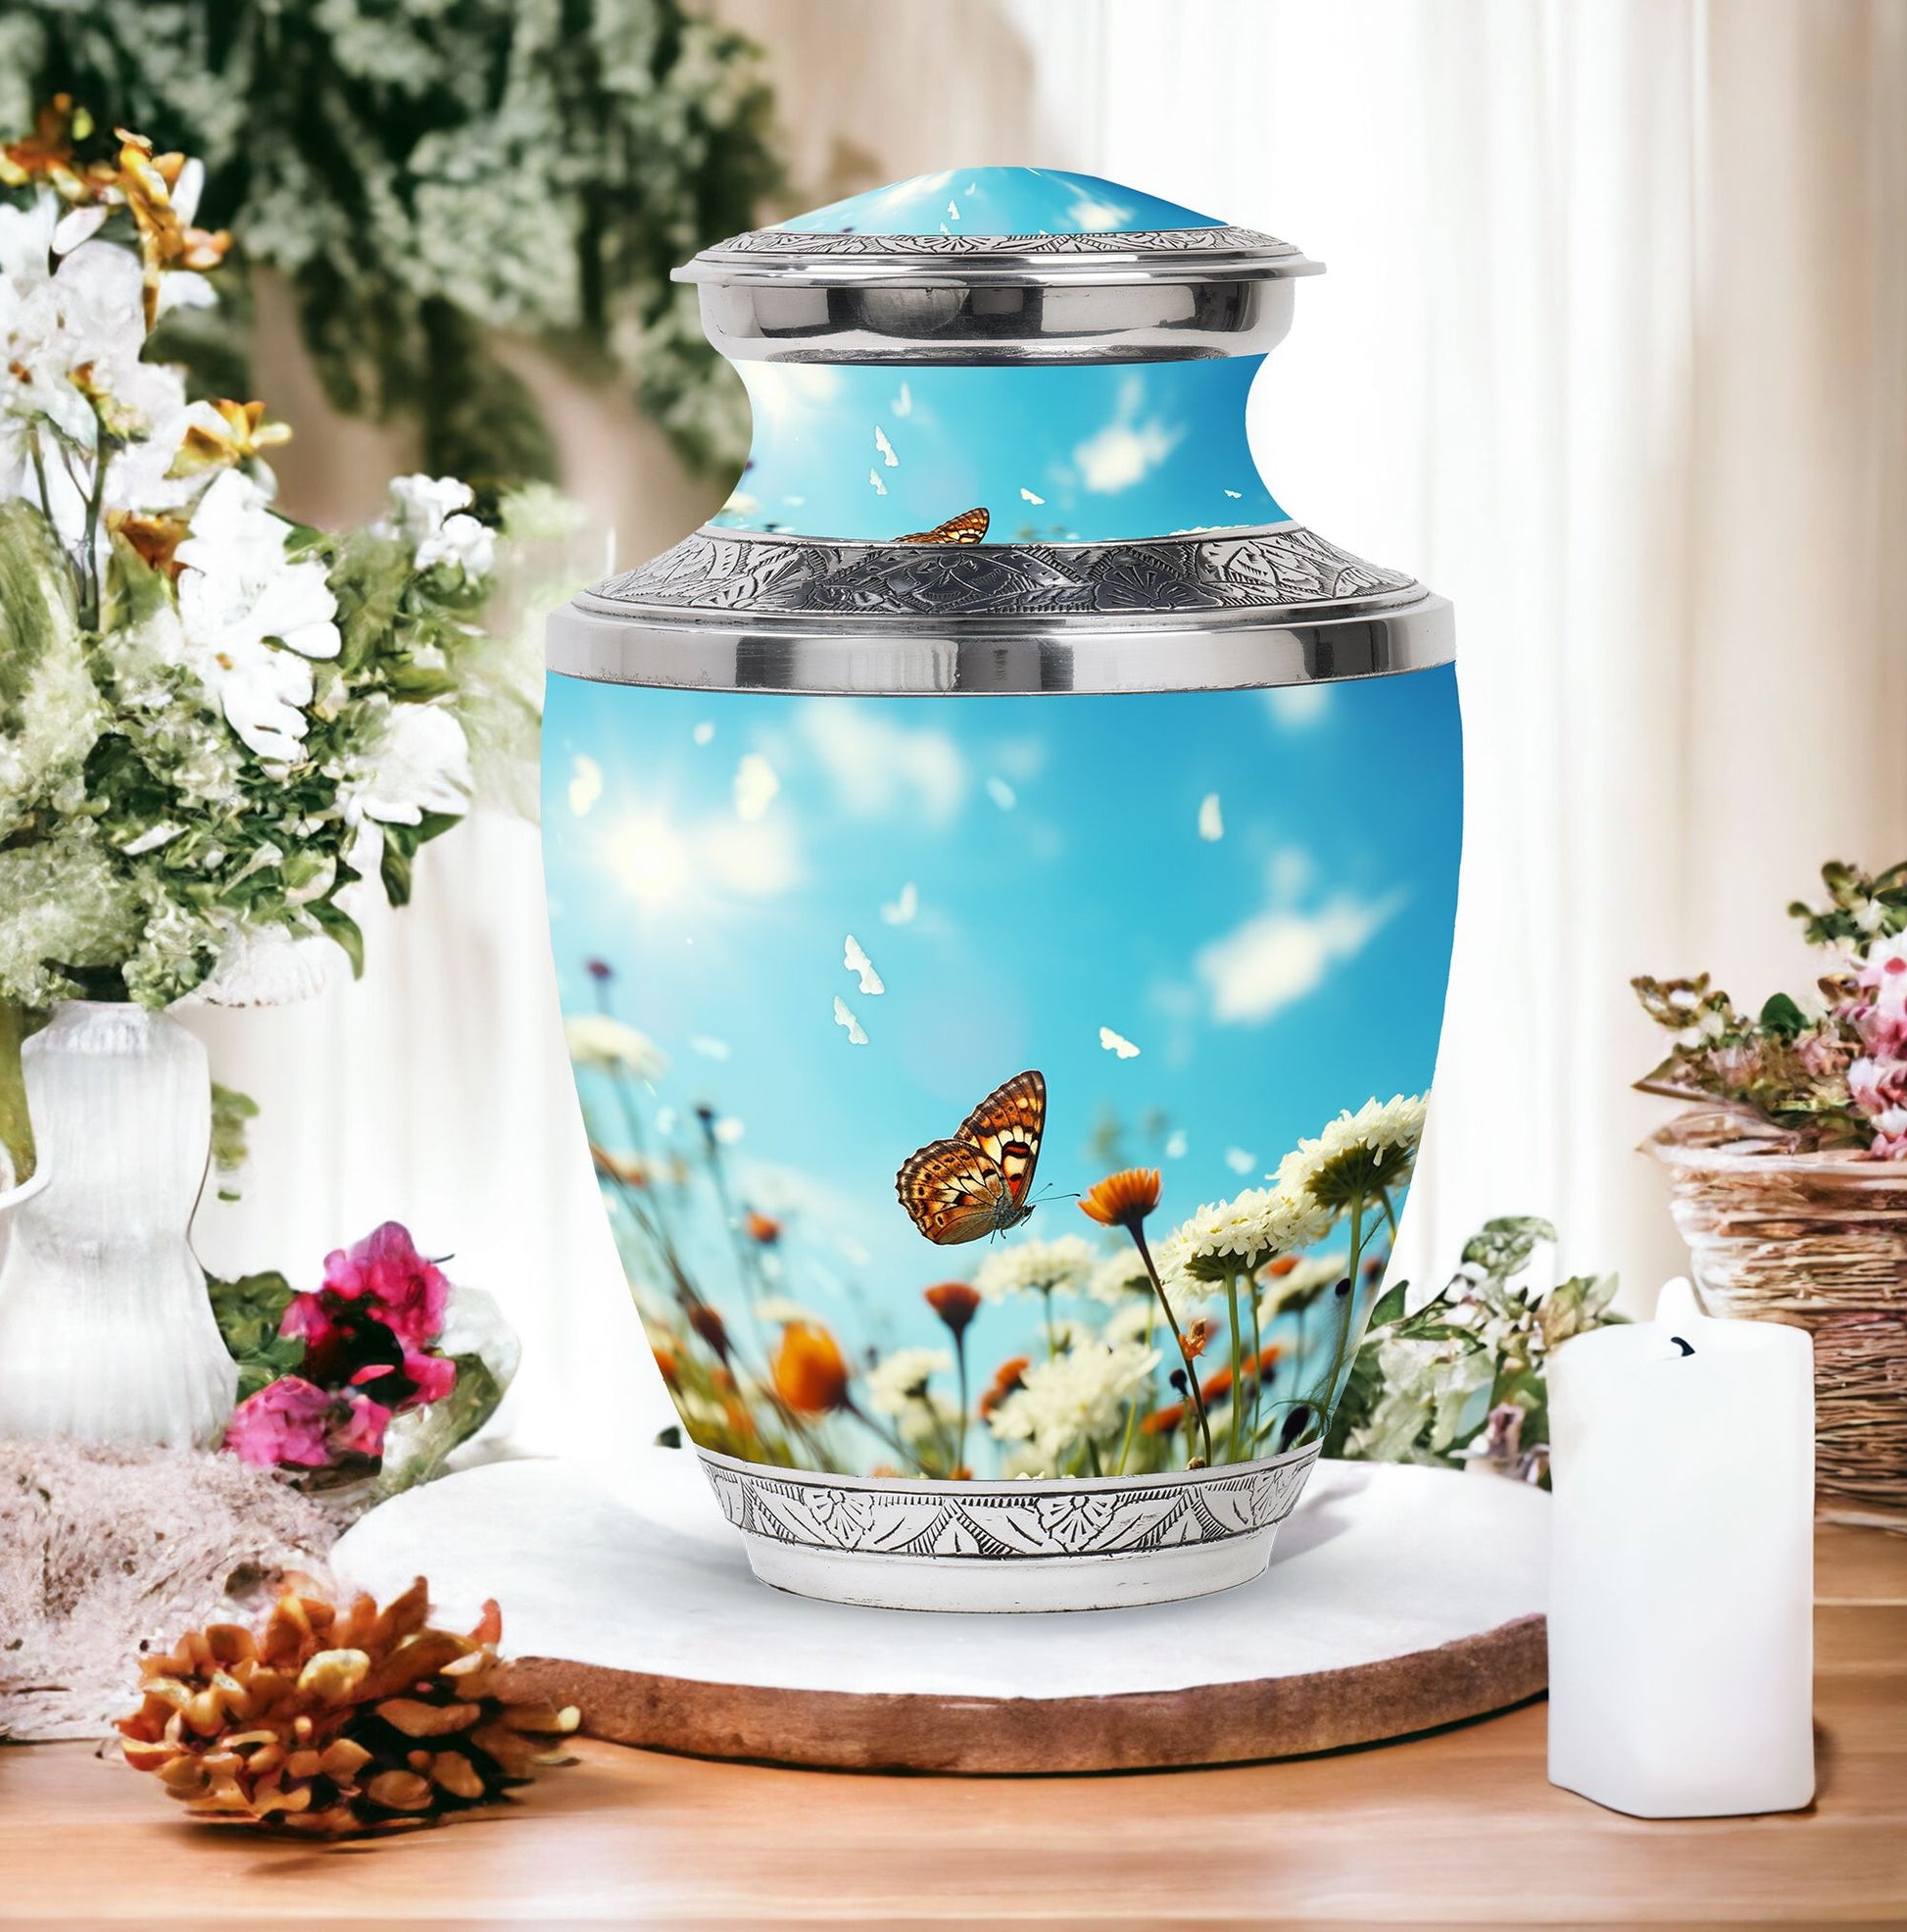 Decorative, colorful butterflies urn used for human ashes, ideal for adult cremation or burial